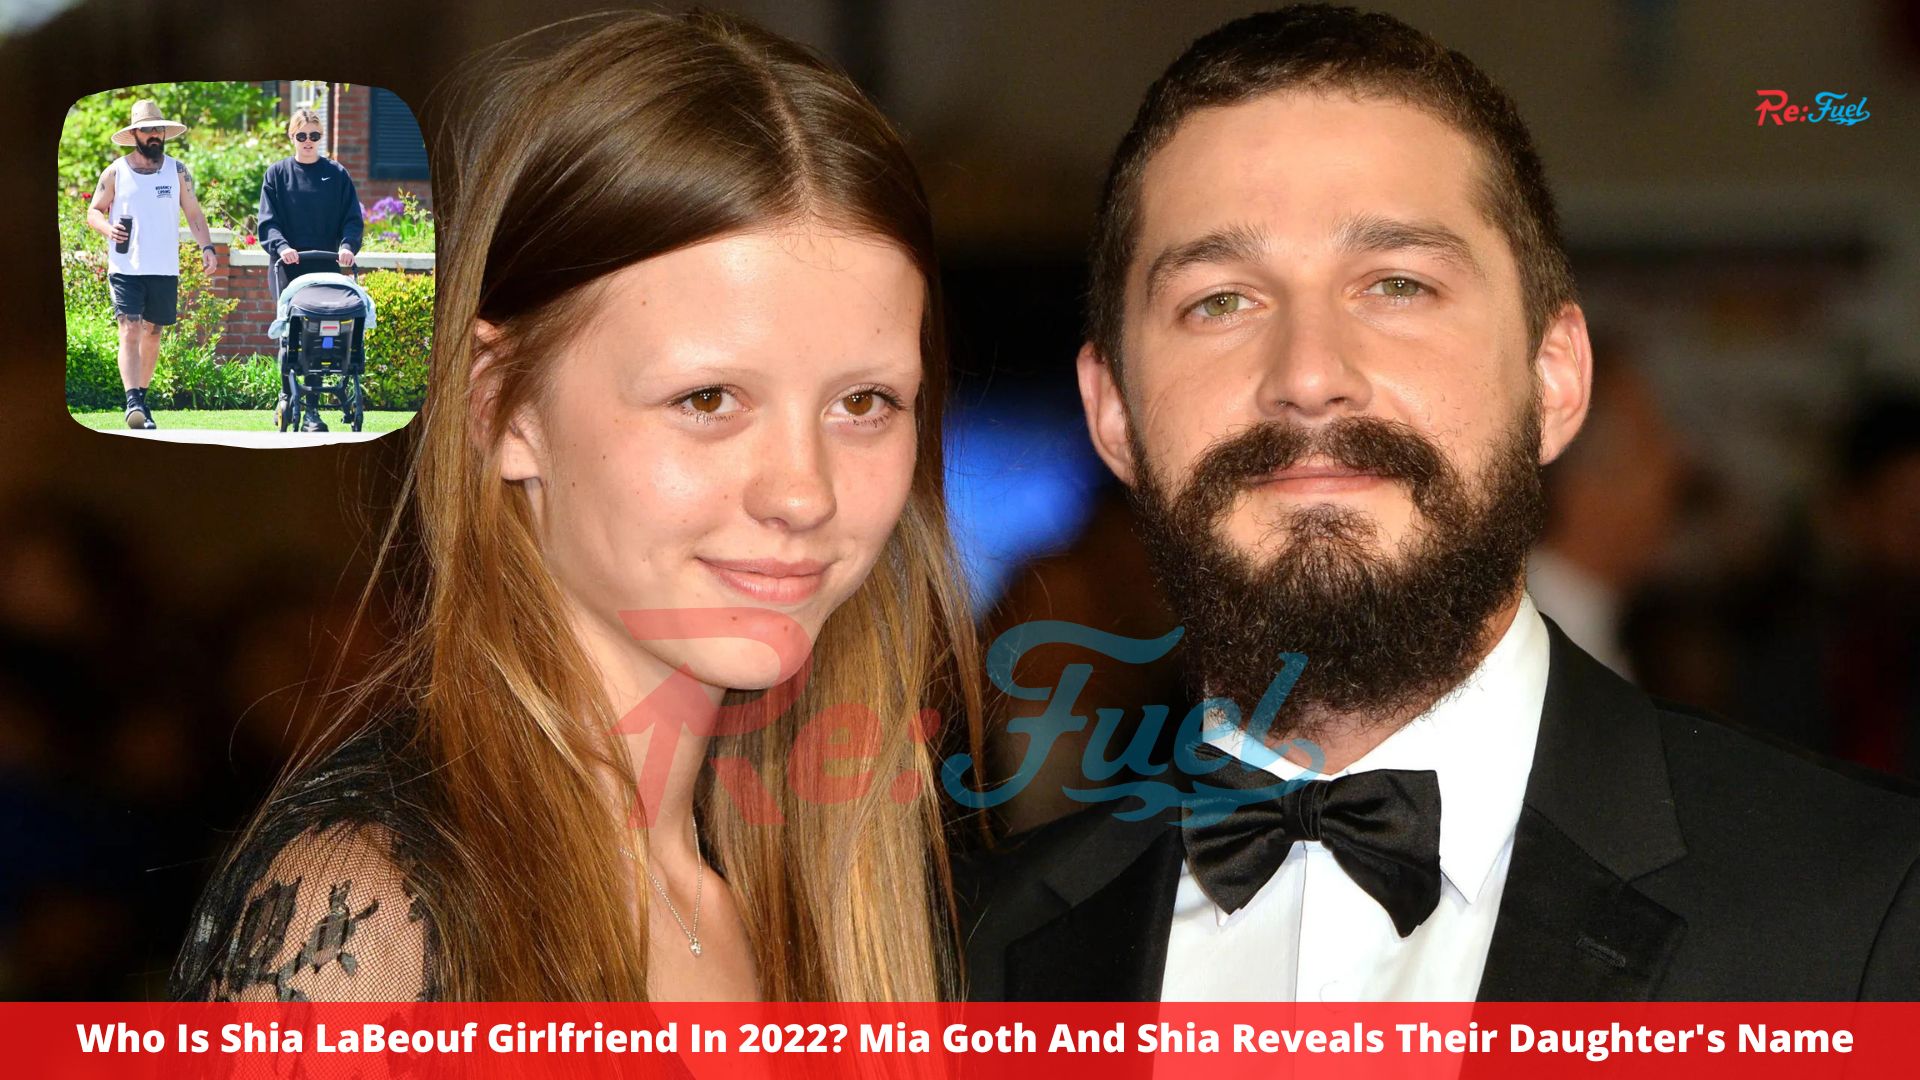 Who Is Shia LaBeouf Girlfriend In 2022? Mia Goth And Shia Reveals Their Daughter's Name